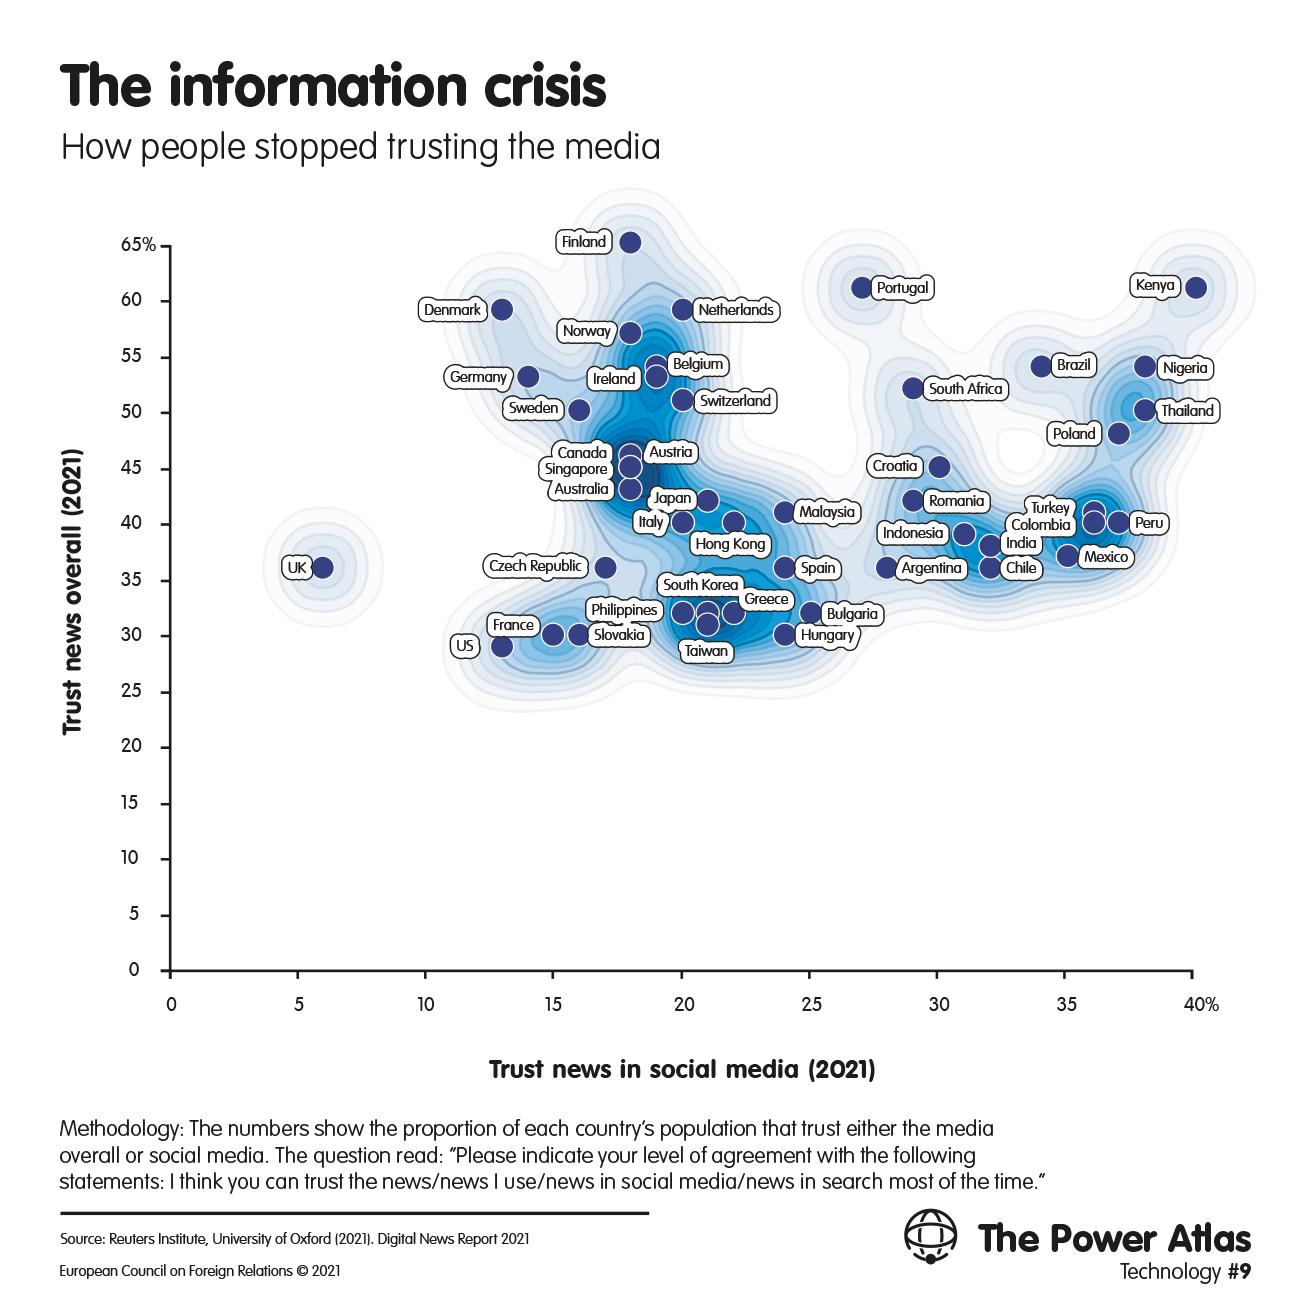 The information crisis: How people stopped trusting the media 
